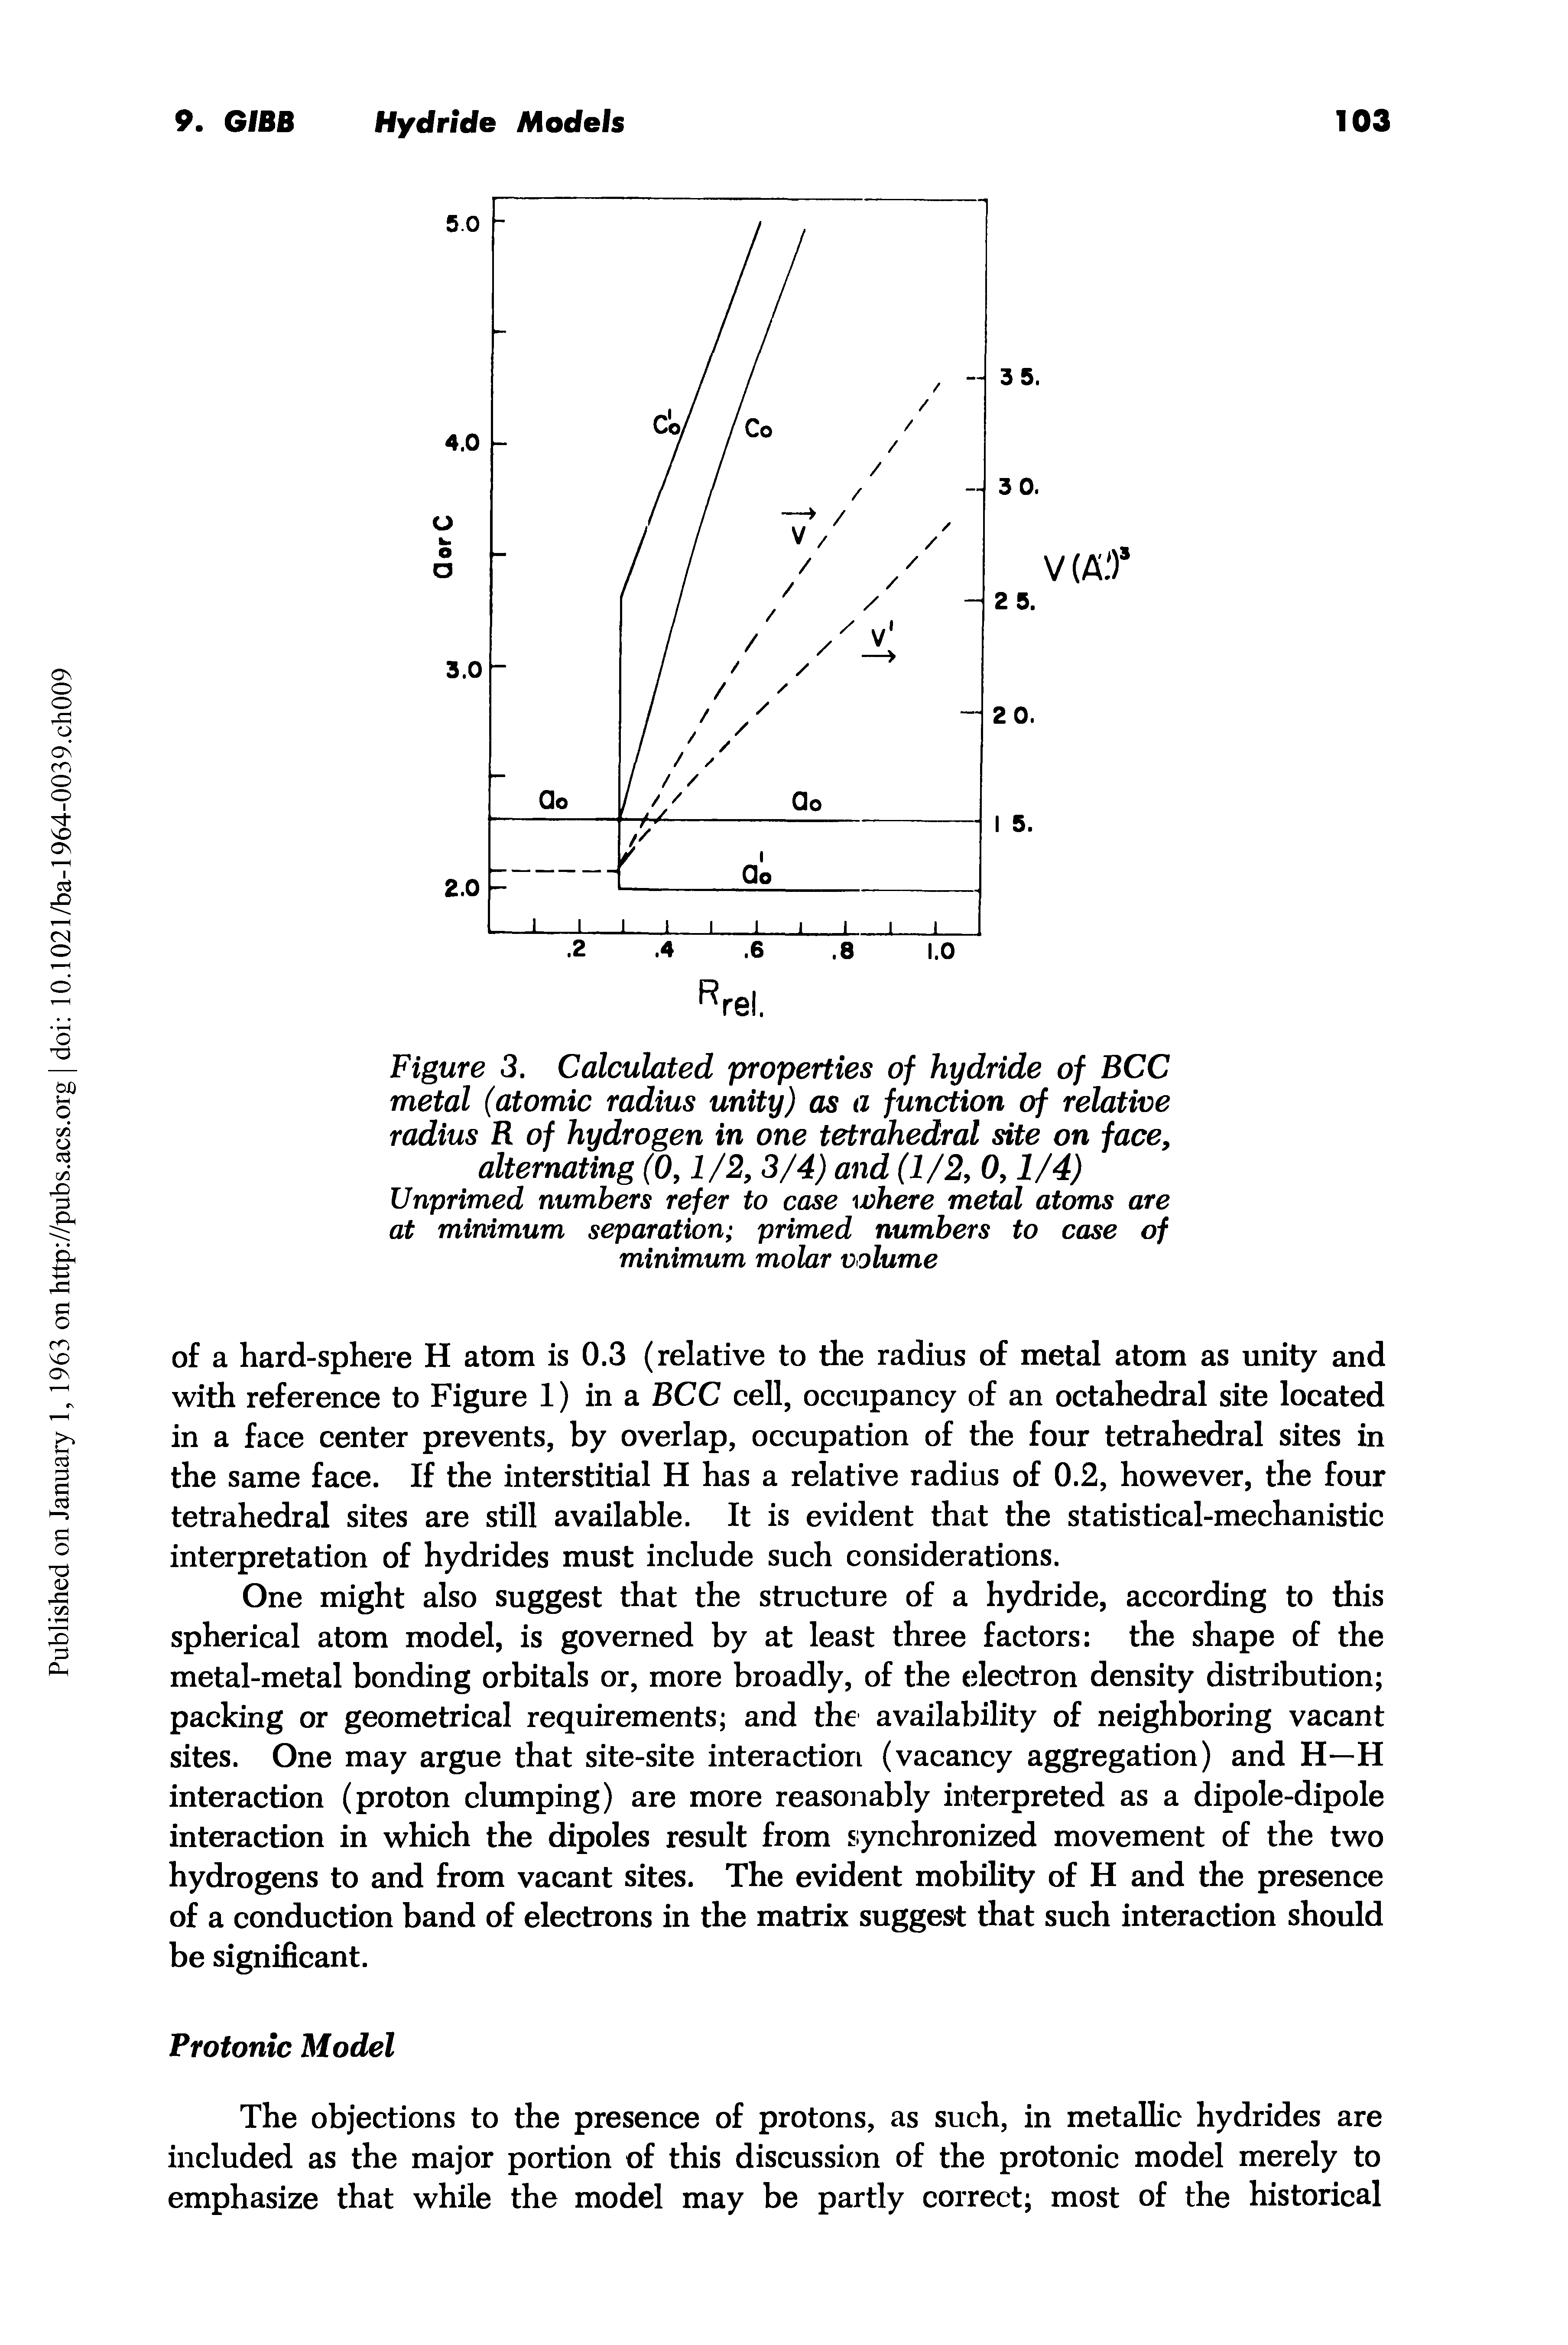 Figure 3. Calculated properties of hydride of BCC metal (atomic radius unity) as a function of relative radius R of hydrogen in one tetrahedral site on face, alternating (0,1/2, 3/4) and (1/2, 0,1/4) Unprimed numbers refer to case where metal atoms are at minimum separation primed numbers to case of minimum molar volume...